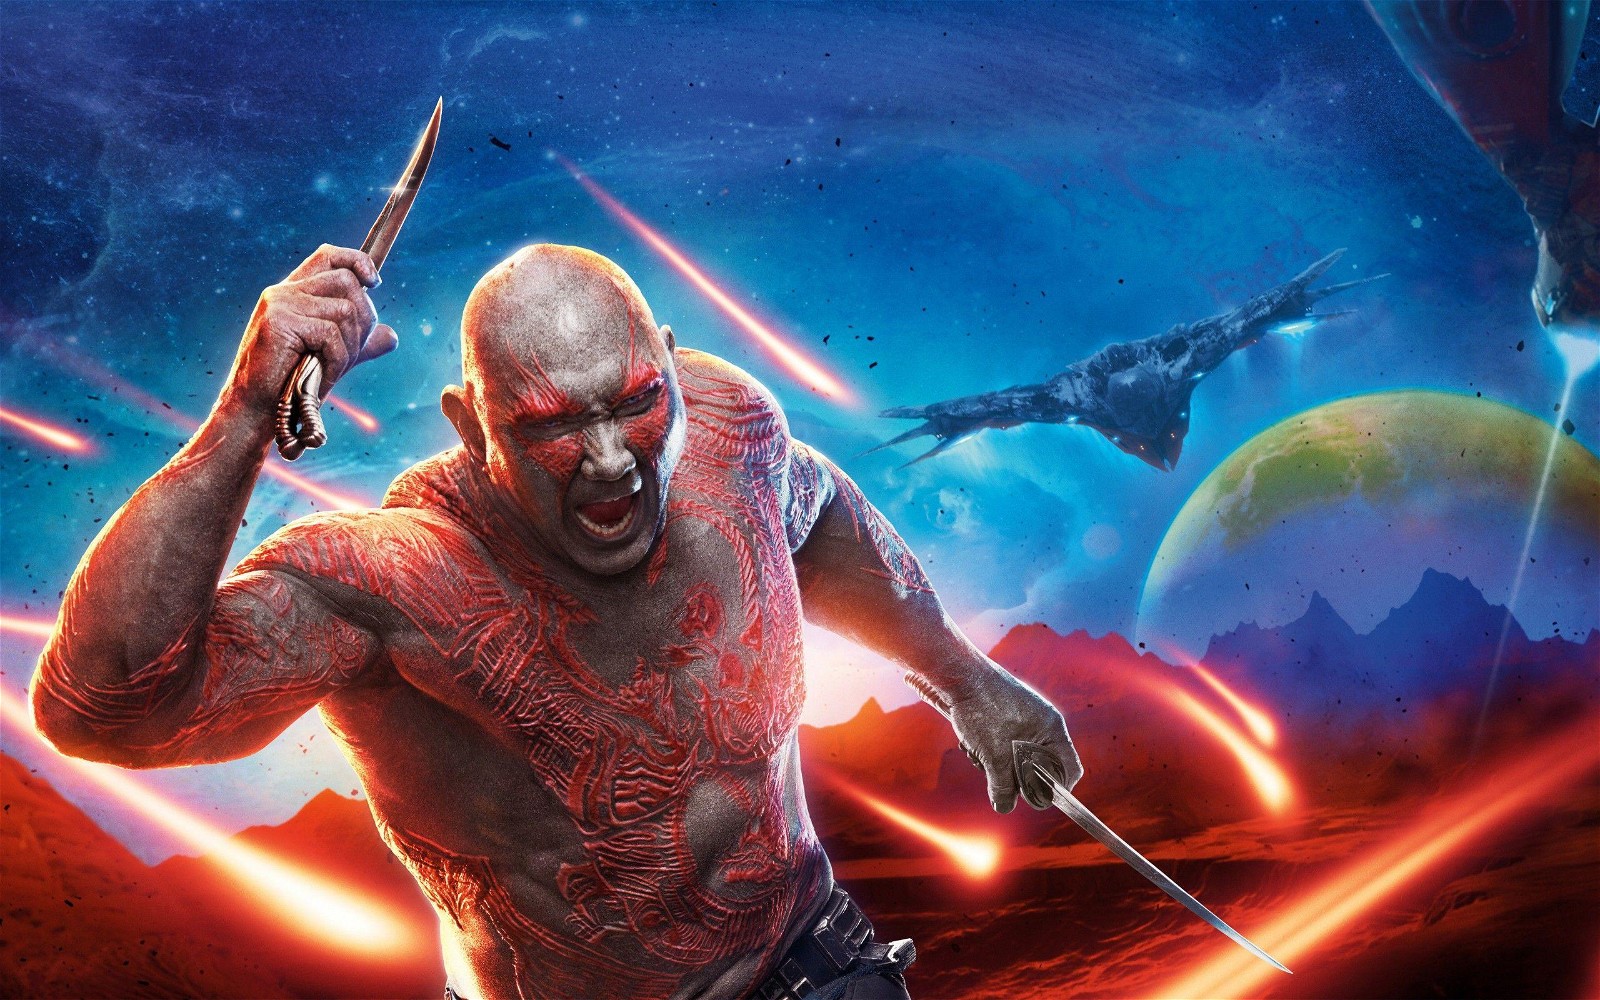 Dave Bautista plays the character of Drax in the MCU.